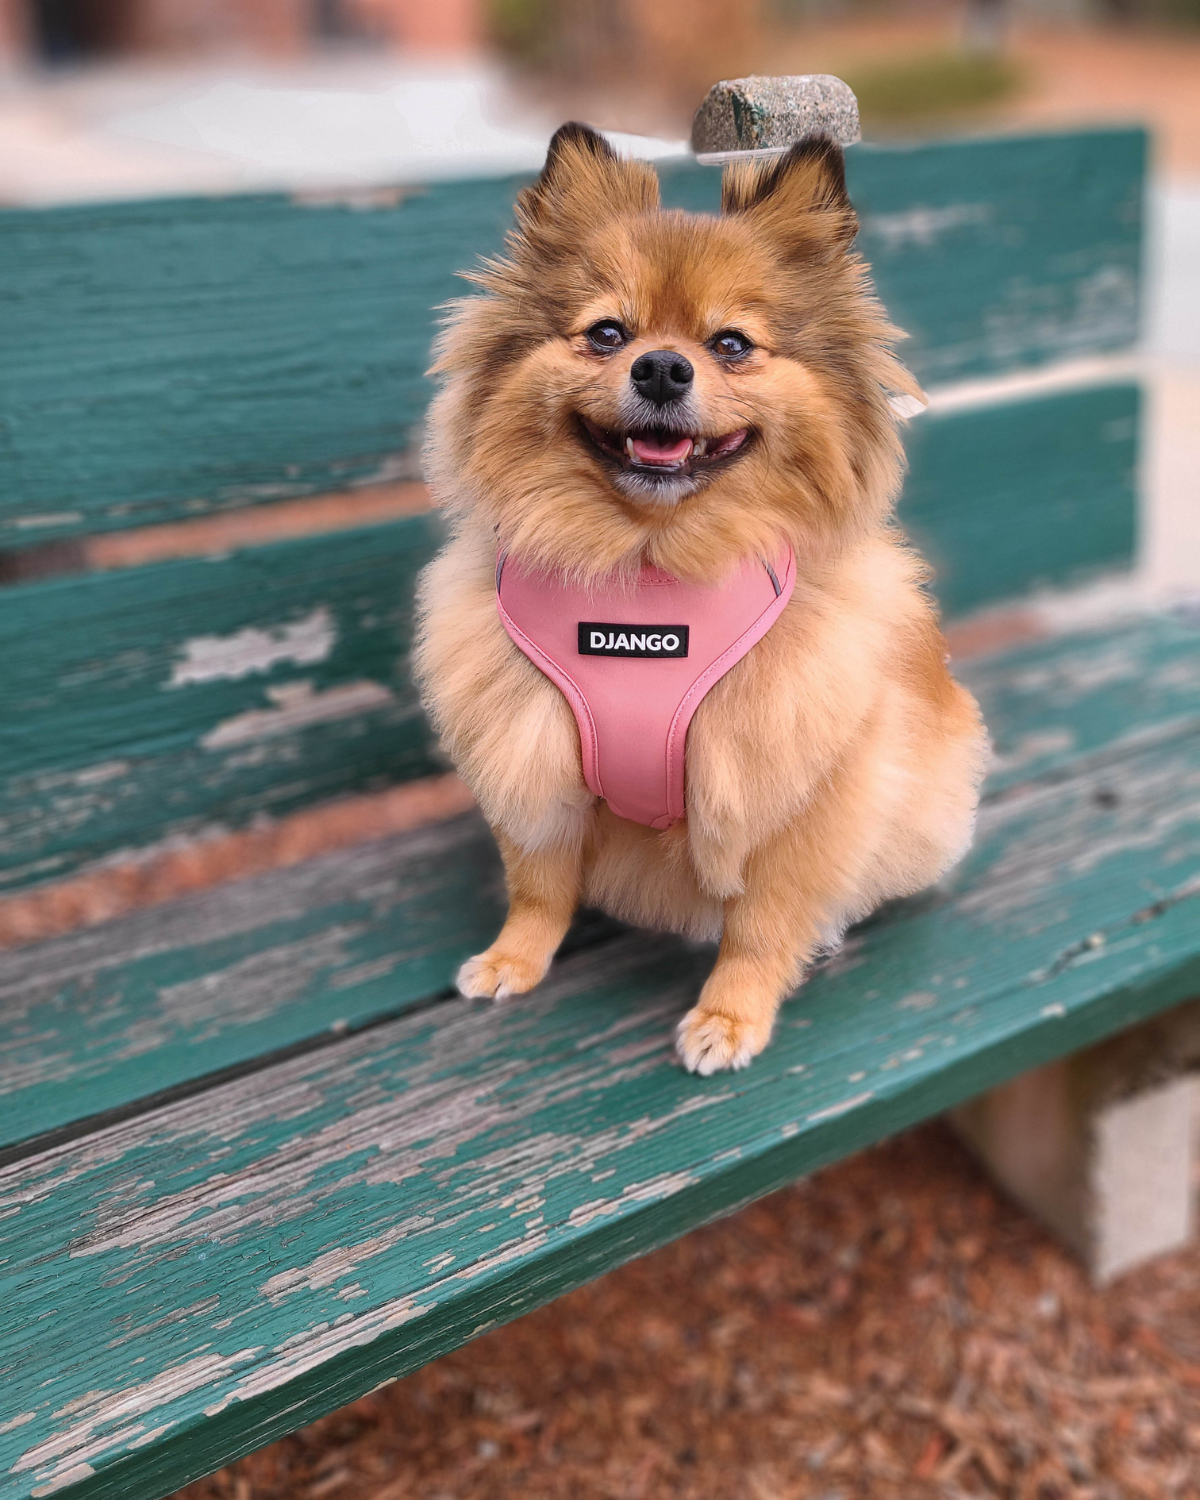 DJANGO's Adventure Dog Harness is a comfortable, lightweight, and padded harness featuring adjustable chest and neck straps, reflective piping, and super soft custom webbing. Bella is a Pomeranian dog and wears size medium - djangobrand.comi